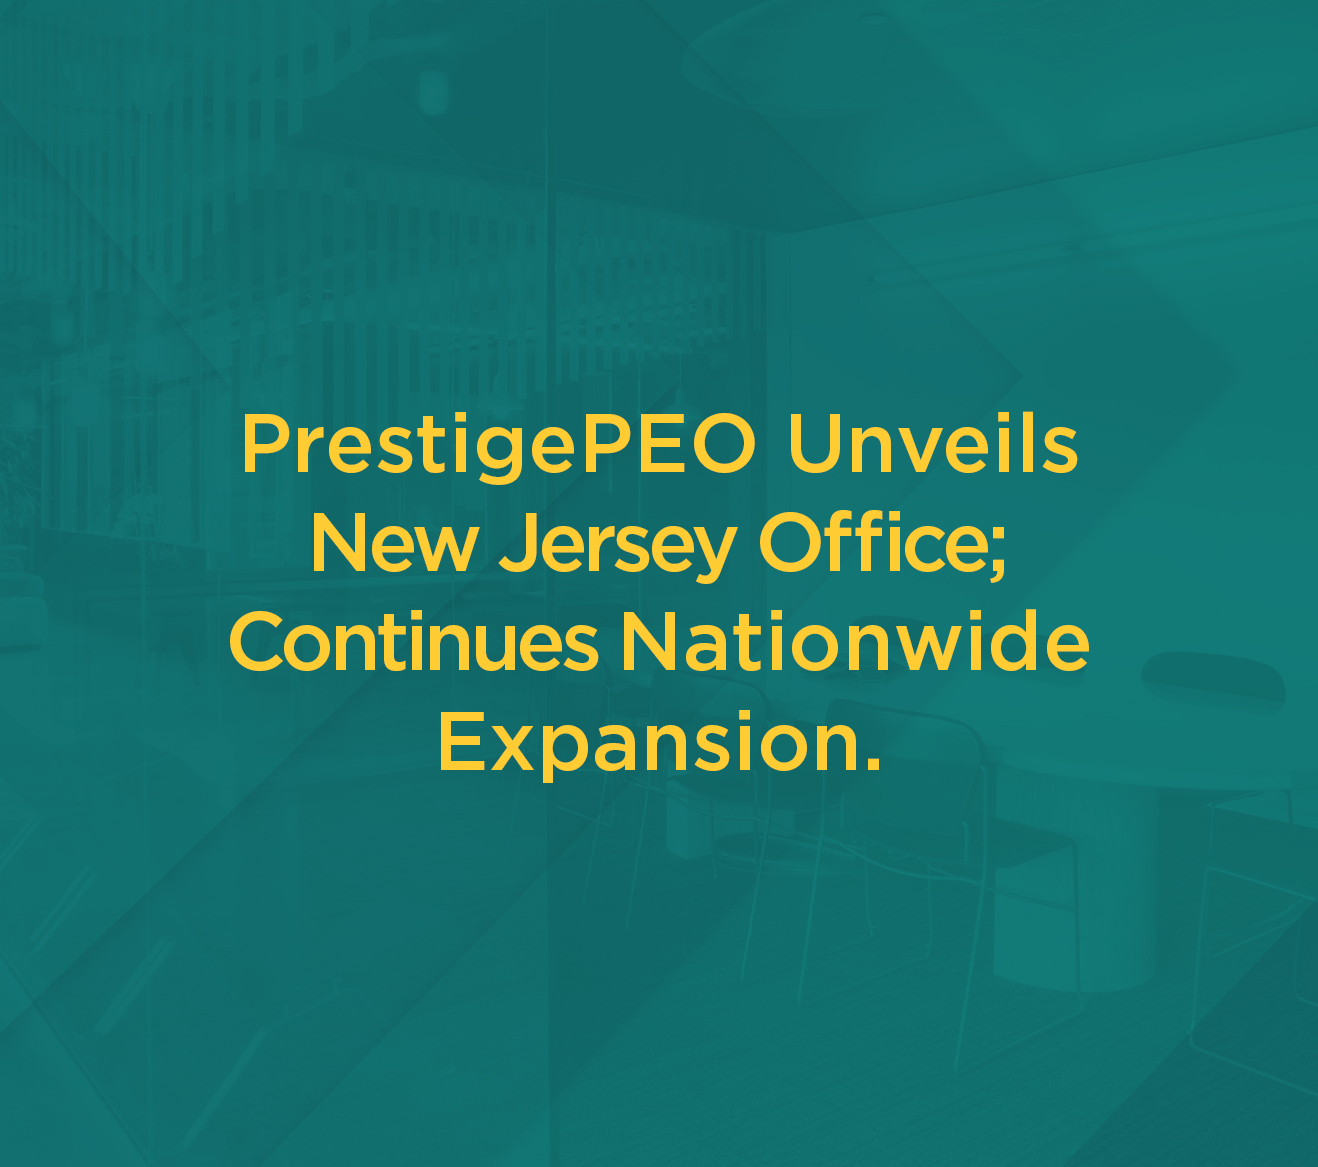 PrestigePEO Unveils New Jersey Office; Continues Nationwide Expansion